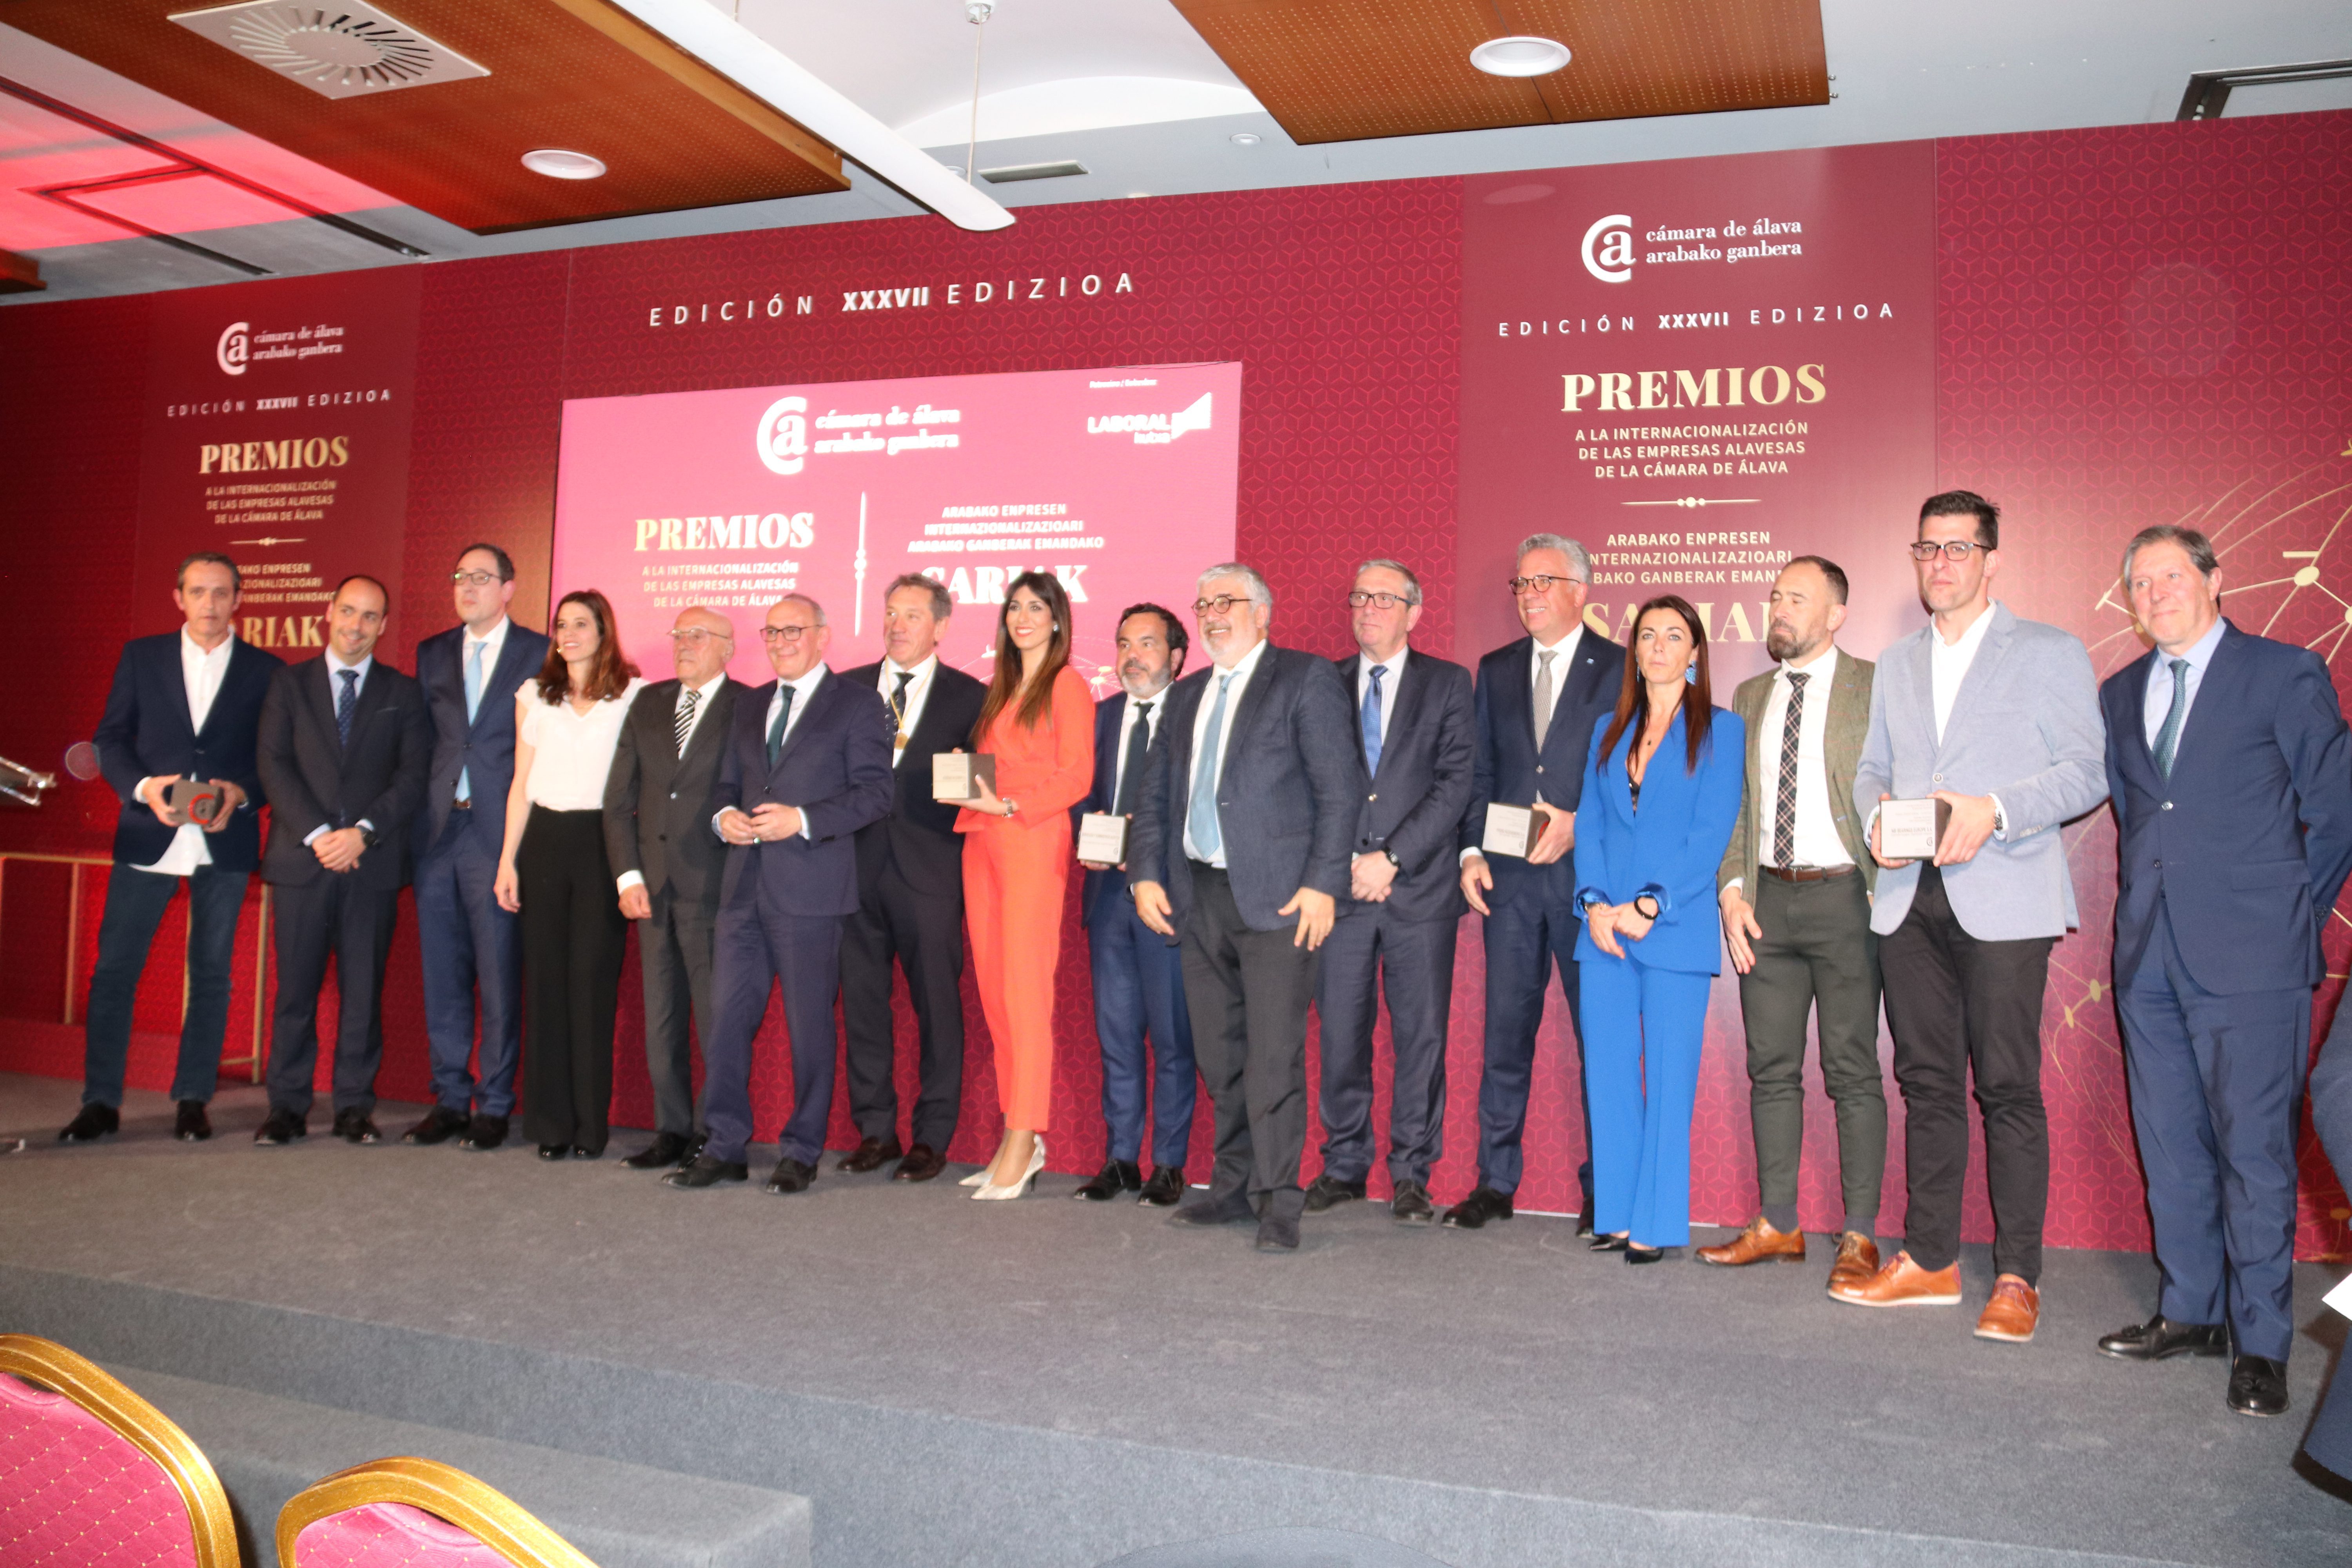 AWARDED COMPANIES IN THE 37TH EDITION OF THE "Awards for the Internationalization of Álava companies from the Álava Chamber of Commerce"